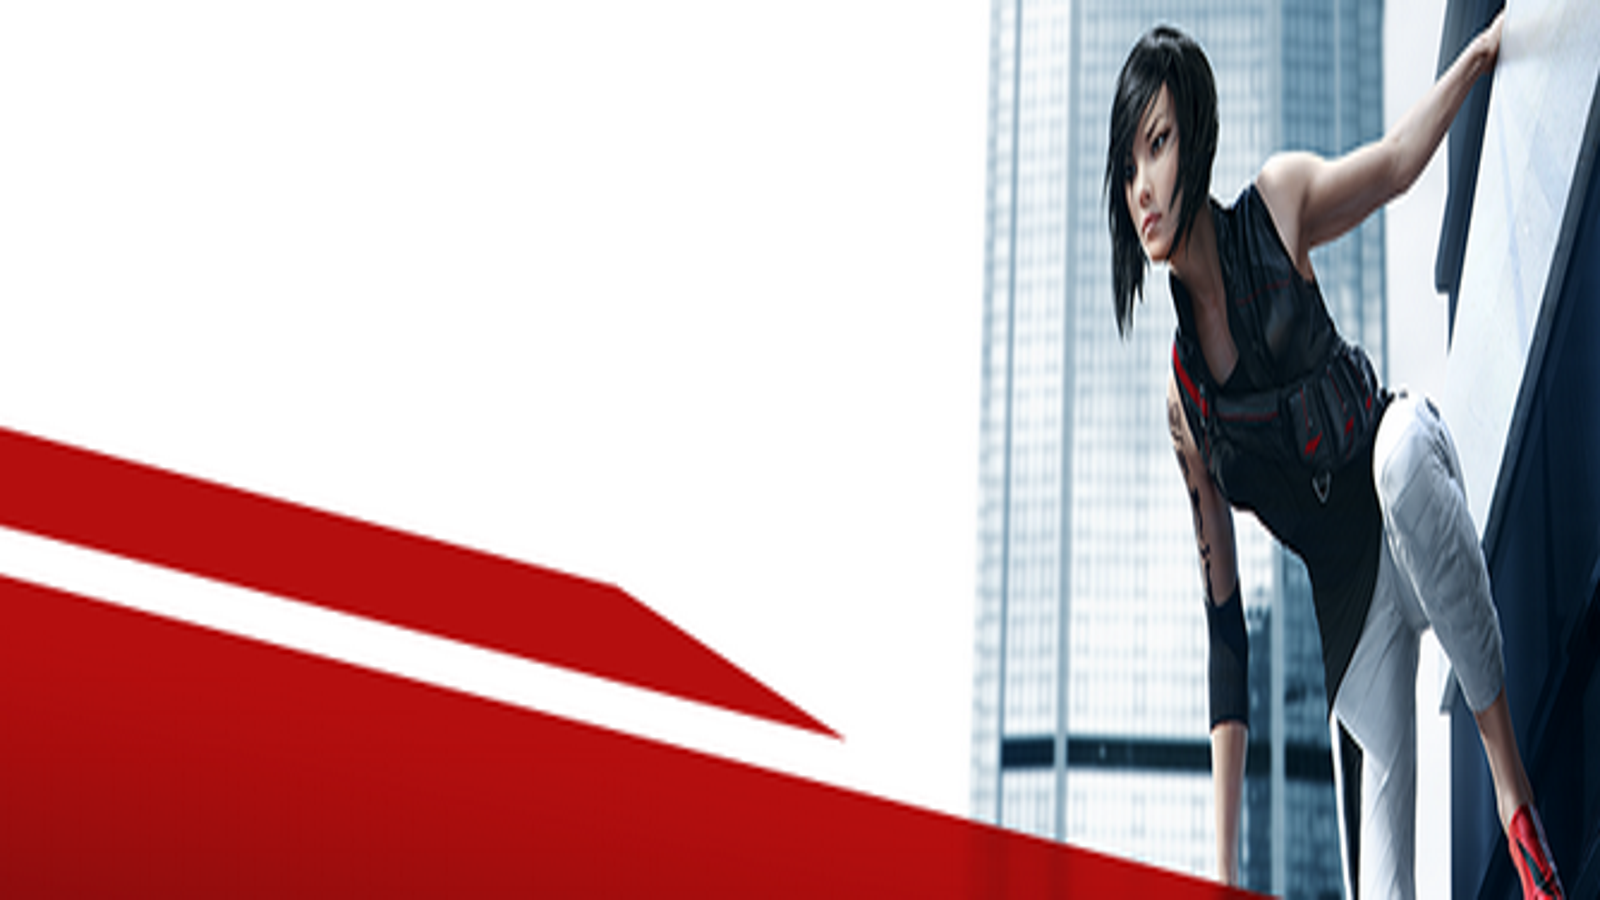 Whether or Not Another Mirror's Edge Will Be Made Is Up To You, Says EA